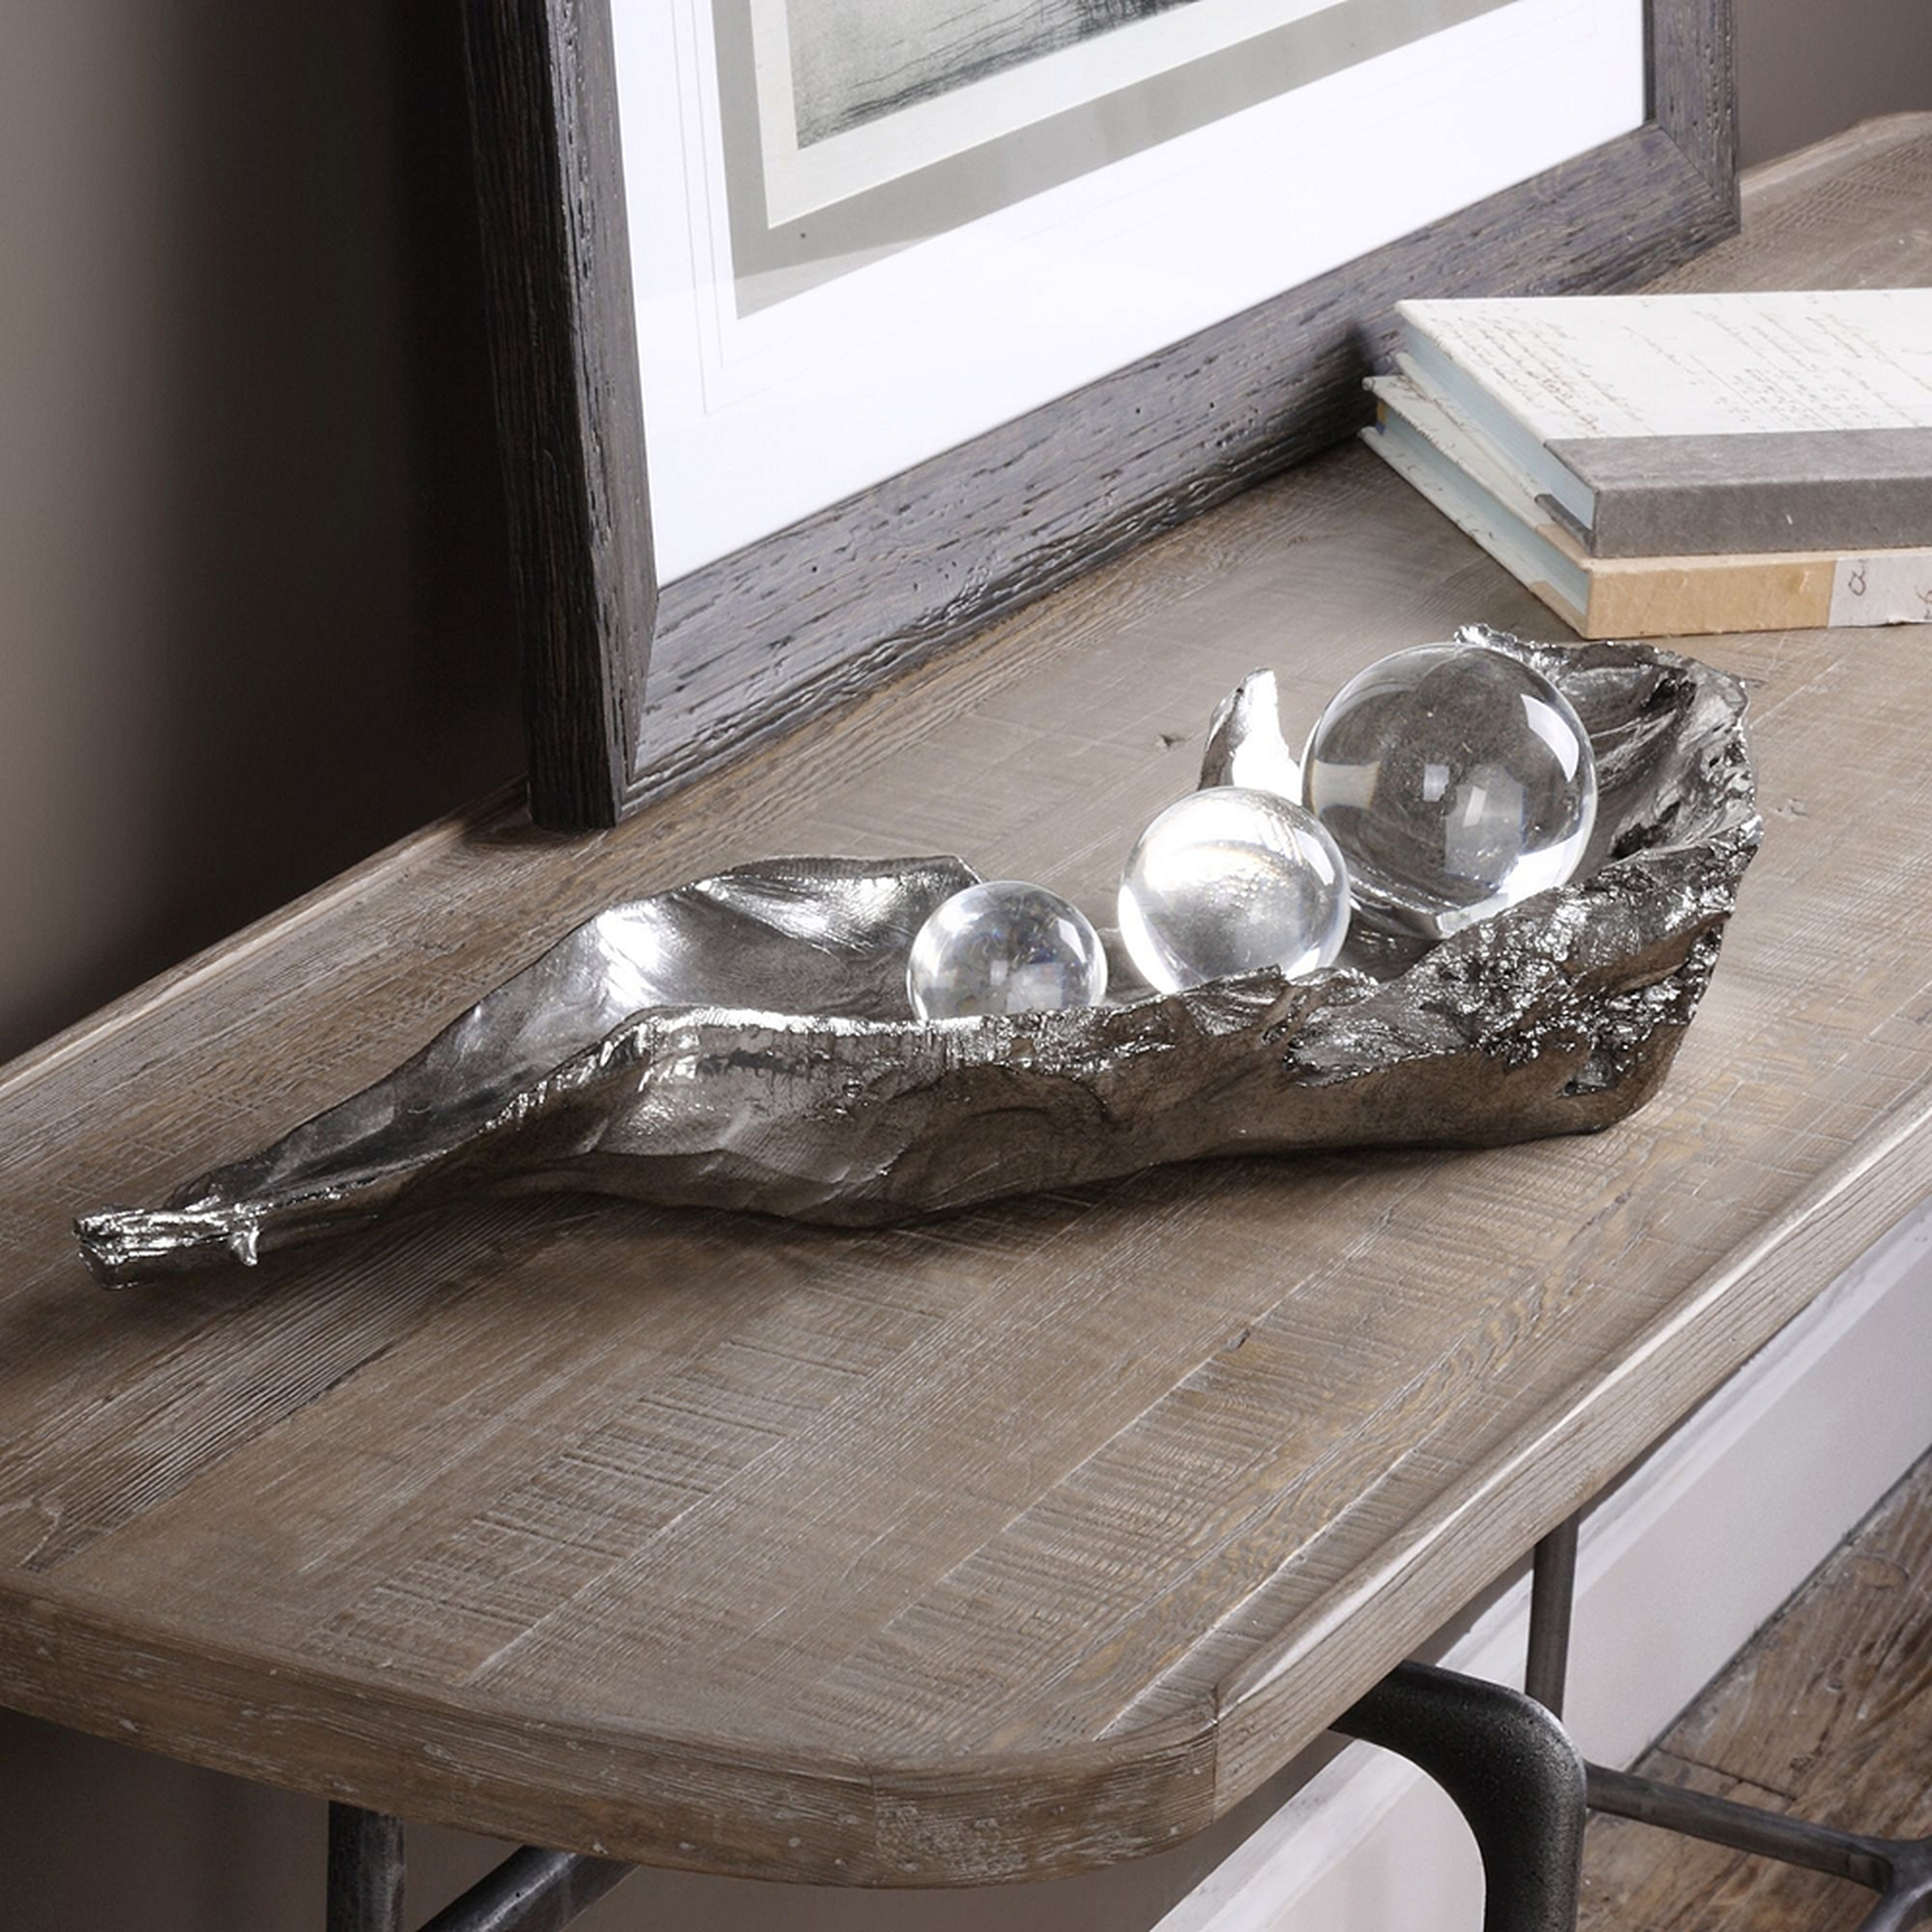 Uttermost Three Peas in a Pod 20 1/2" Wide Silver Sculpture - Style # 88F01 - Lamps Plus